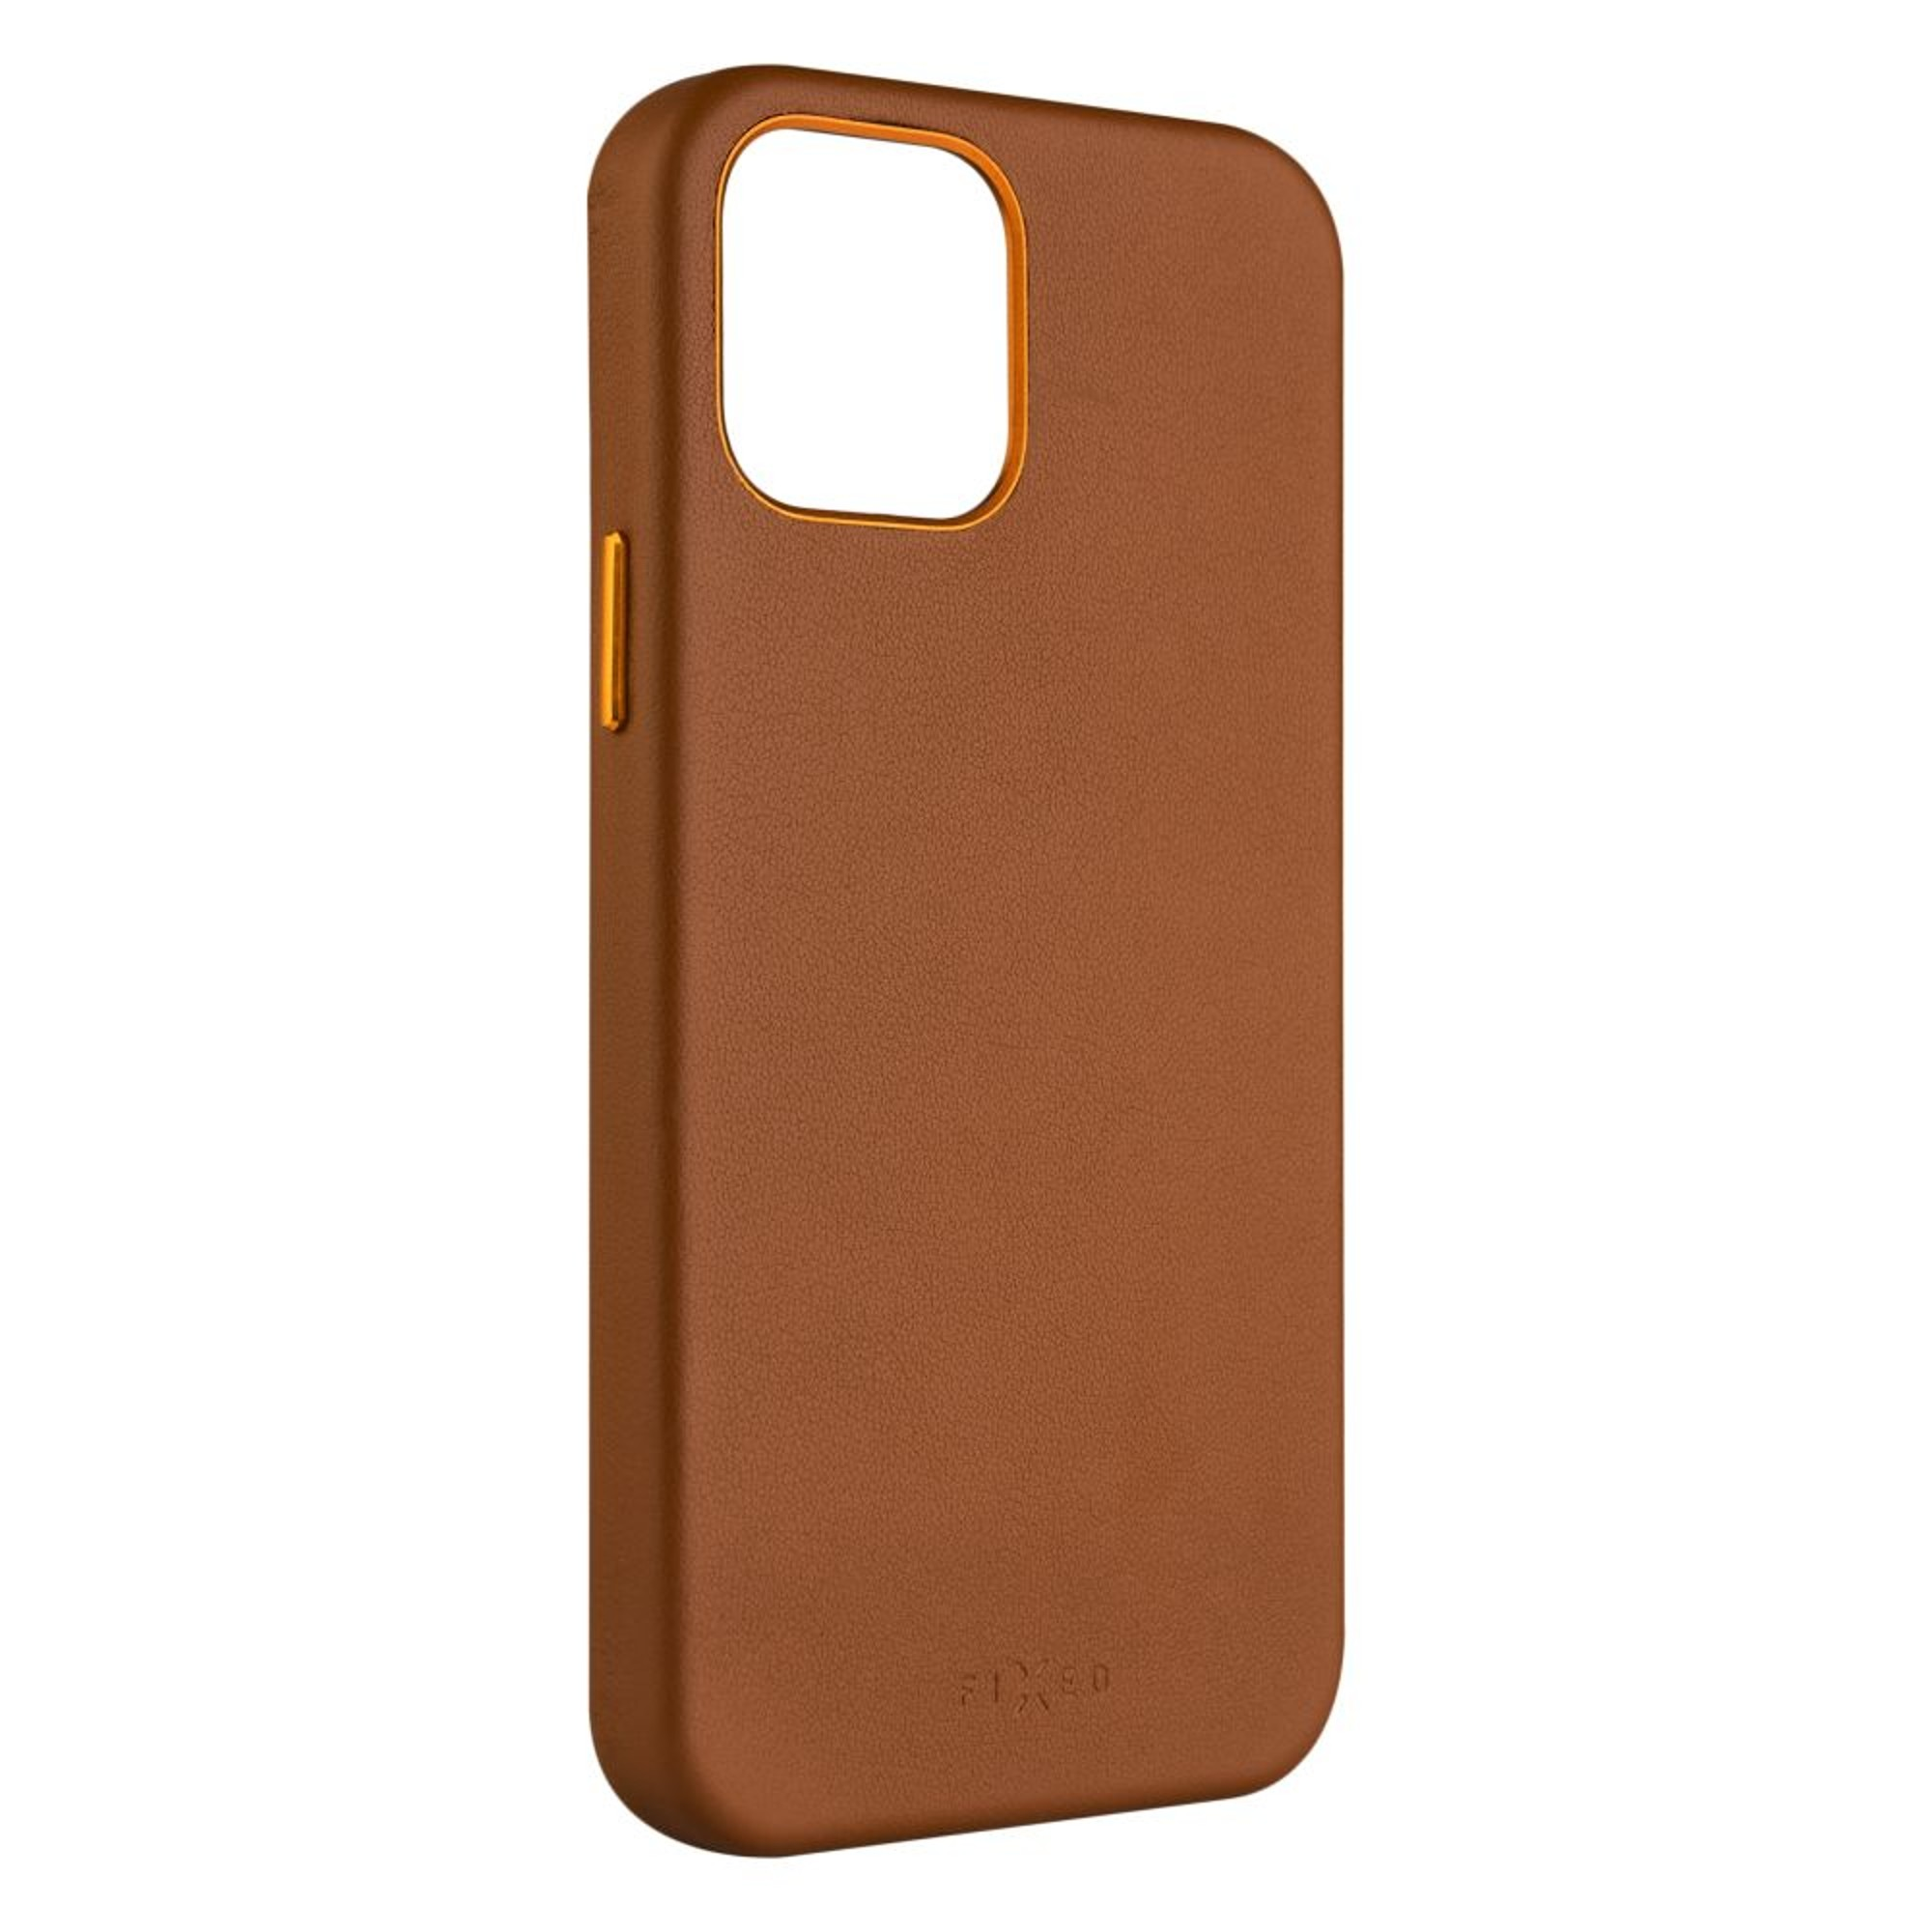 FIXLM-793-BRW, FIXED Pro, iPhone Apple, Braun Backcover, 13